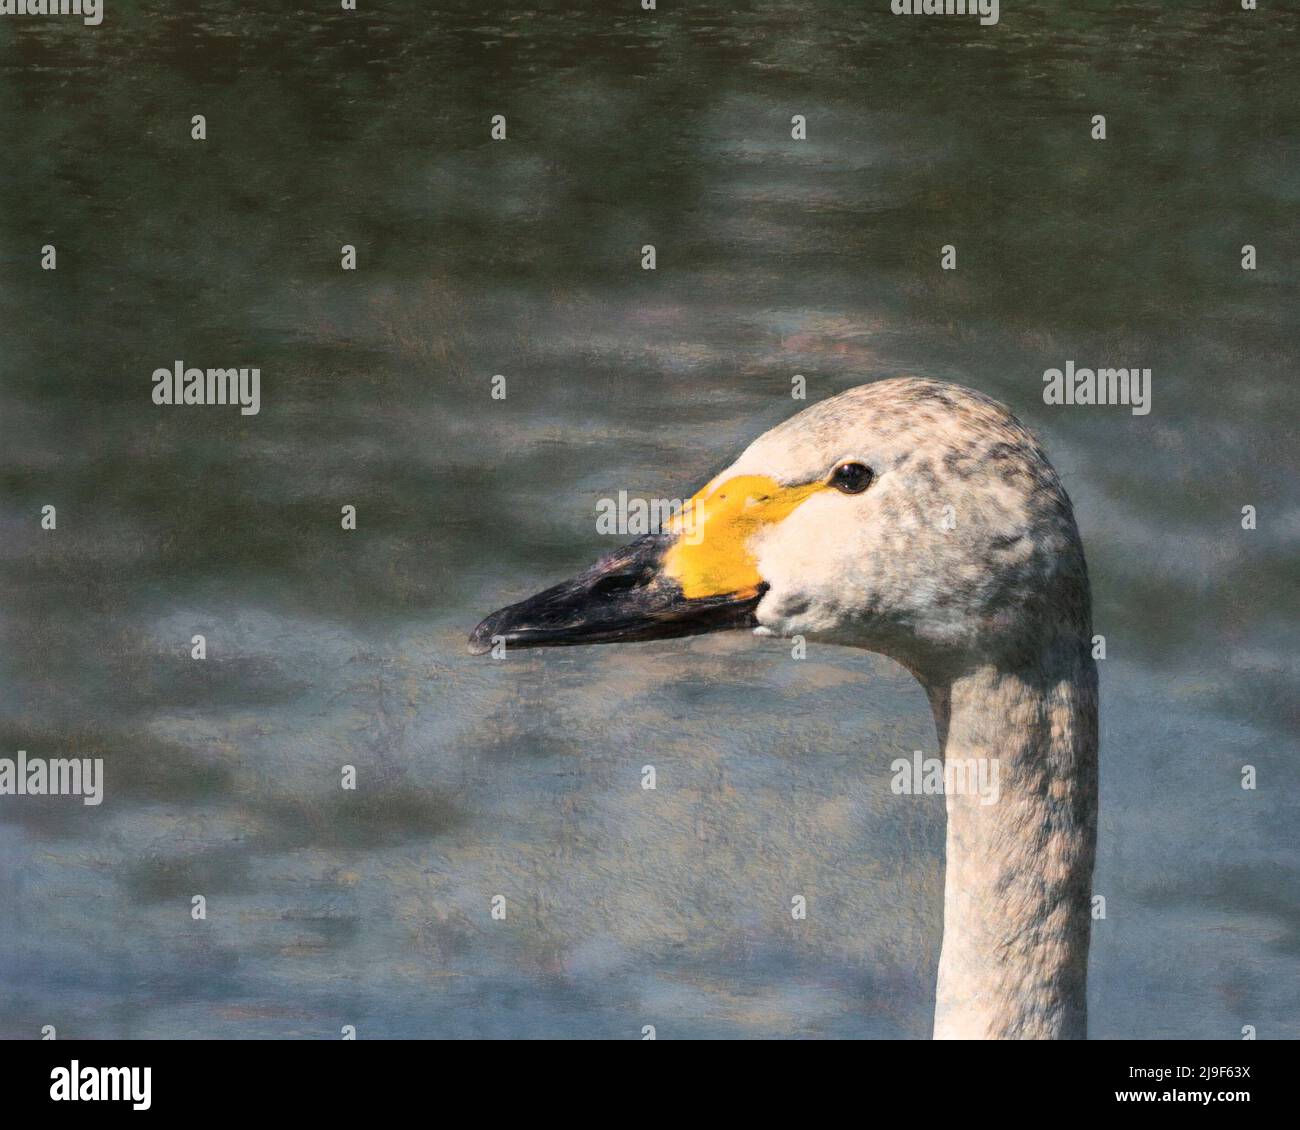 Mixed media photograph and digital art image of a Bewick's swan head Stock Photo